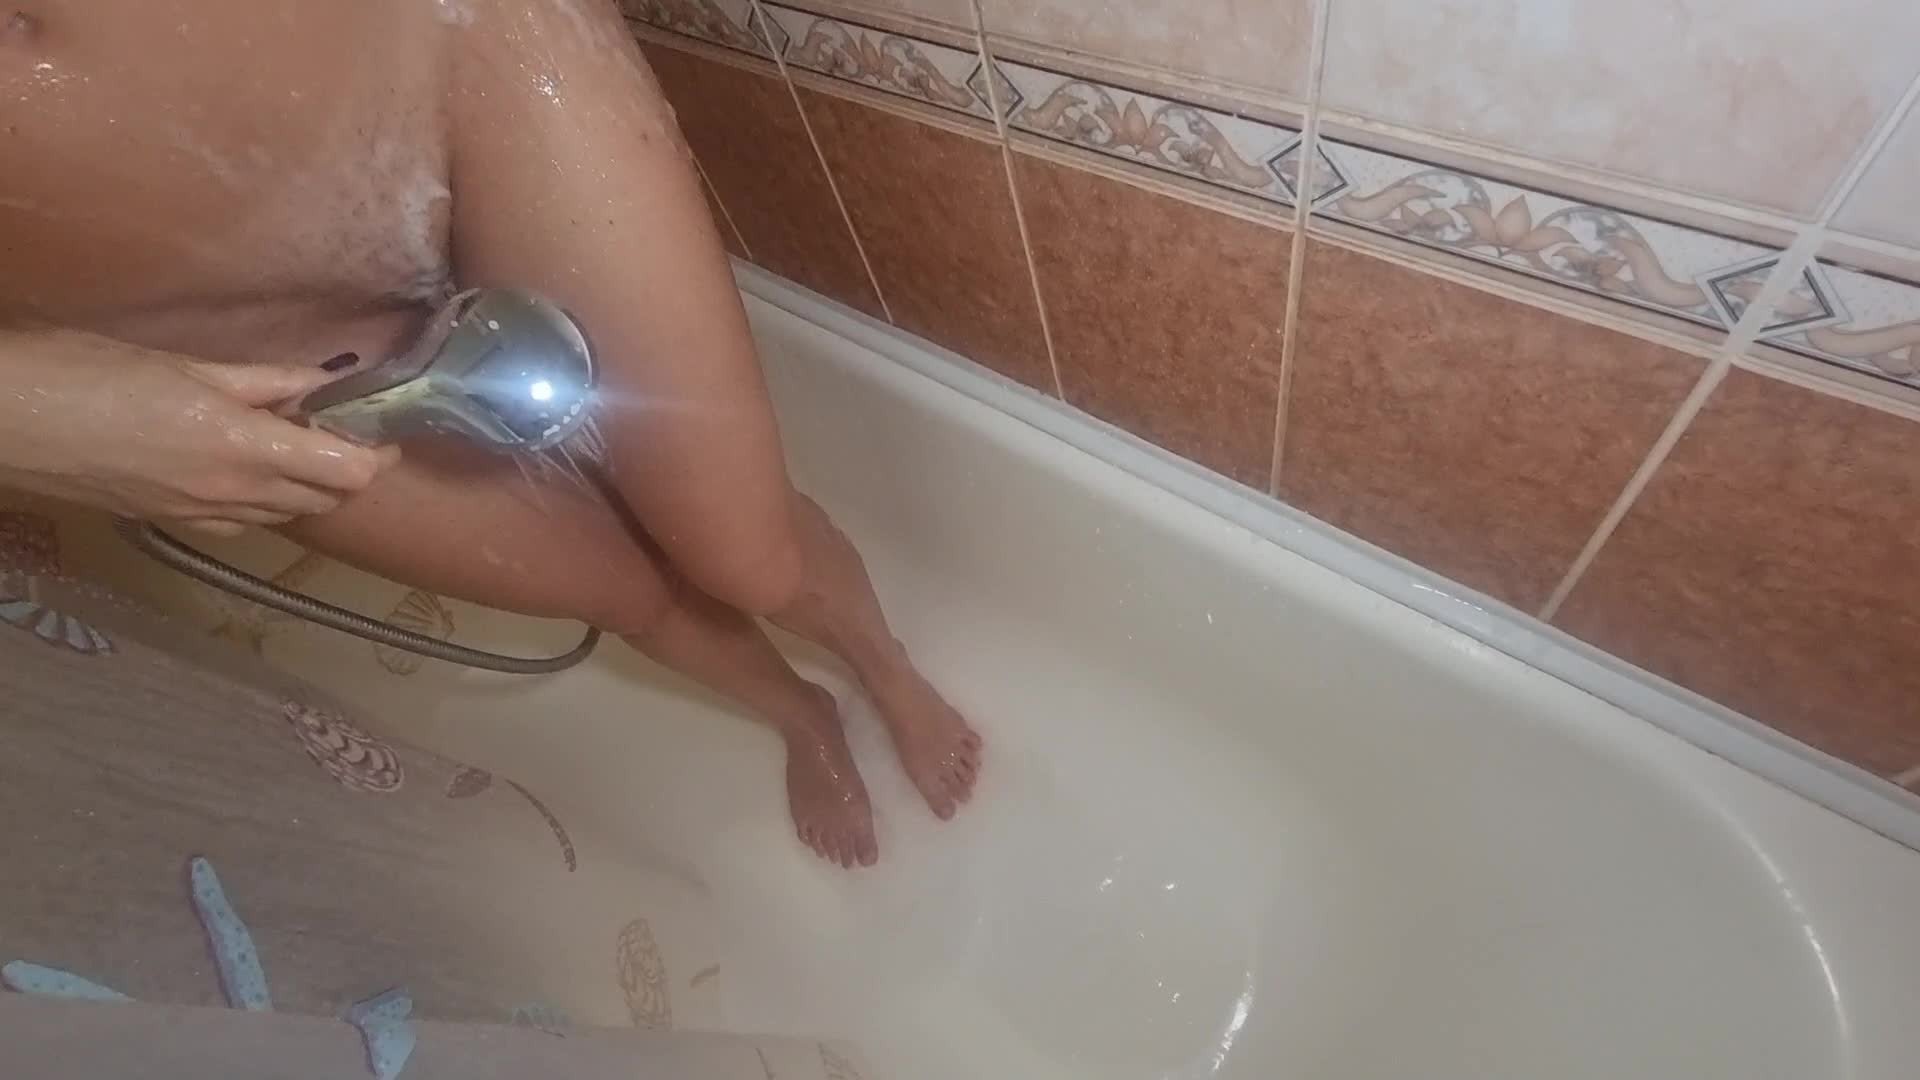 Watch the Video by Marthabullles with the username @Marthabullles, who is a star user, posted on July 5, 2023. The post is about the topic MILF. and the text says 'Do you want to play with me while I'm in the shower?'